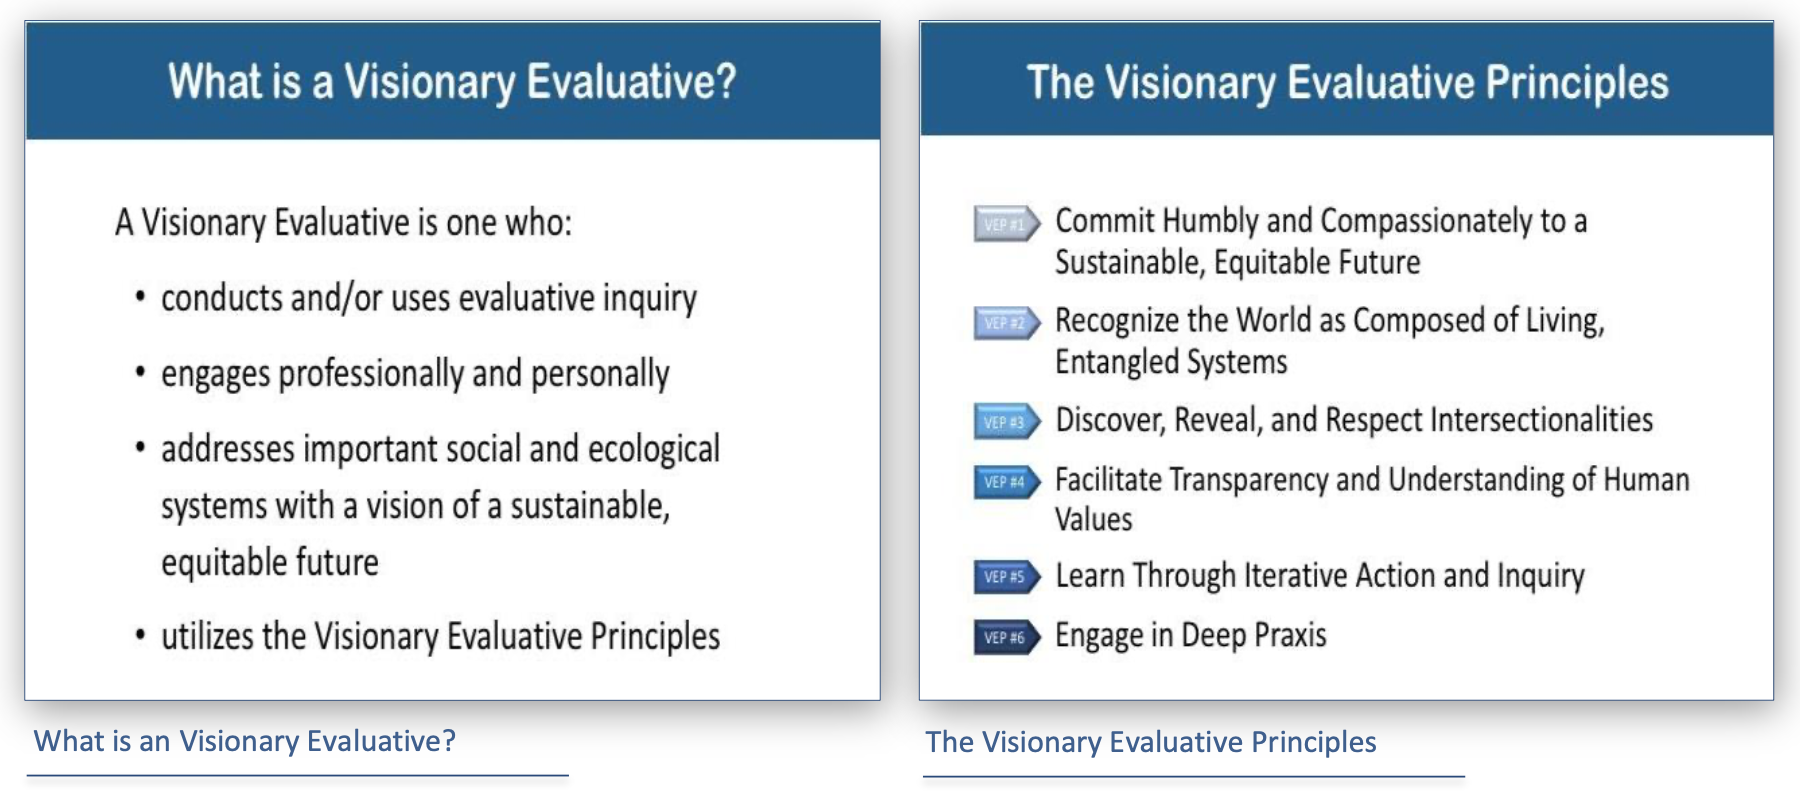 What is a Visionary Evaluative? and The Visionary Evaluative Principles bullet points